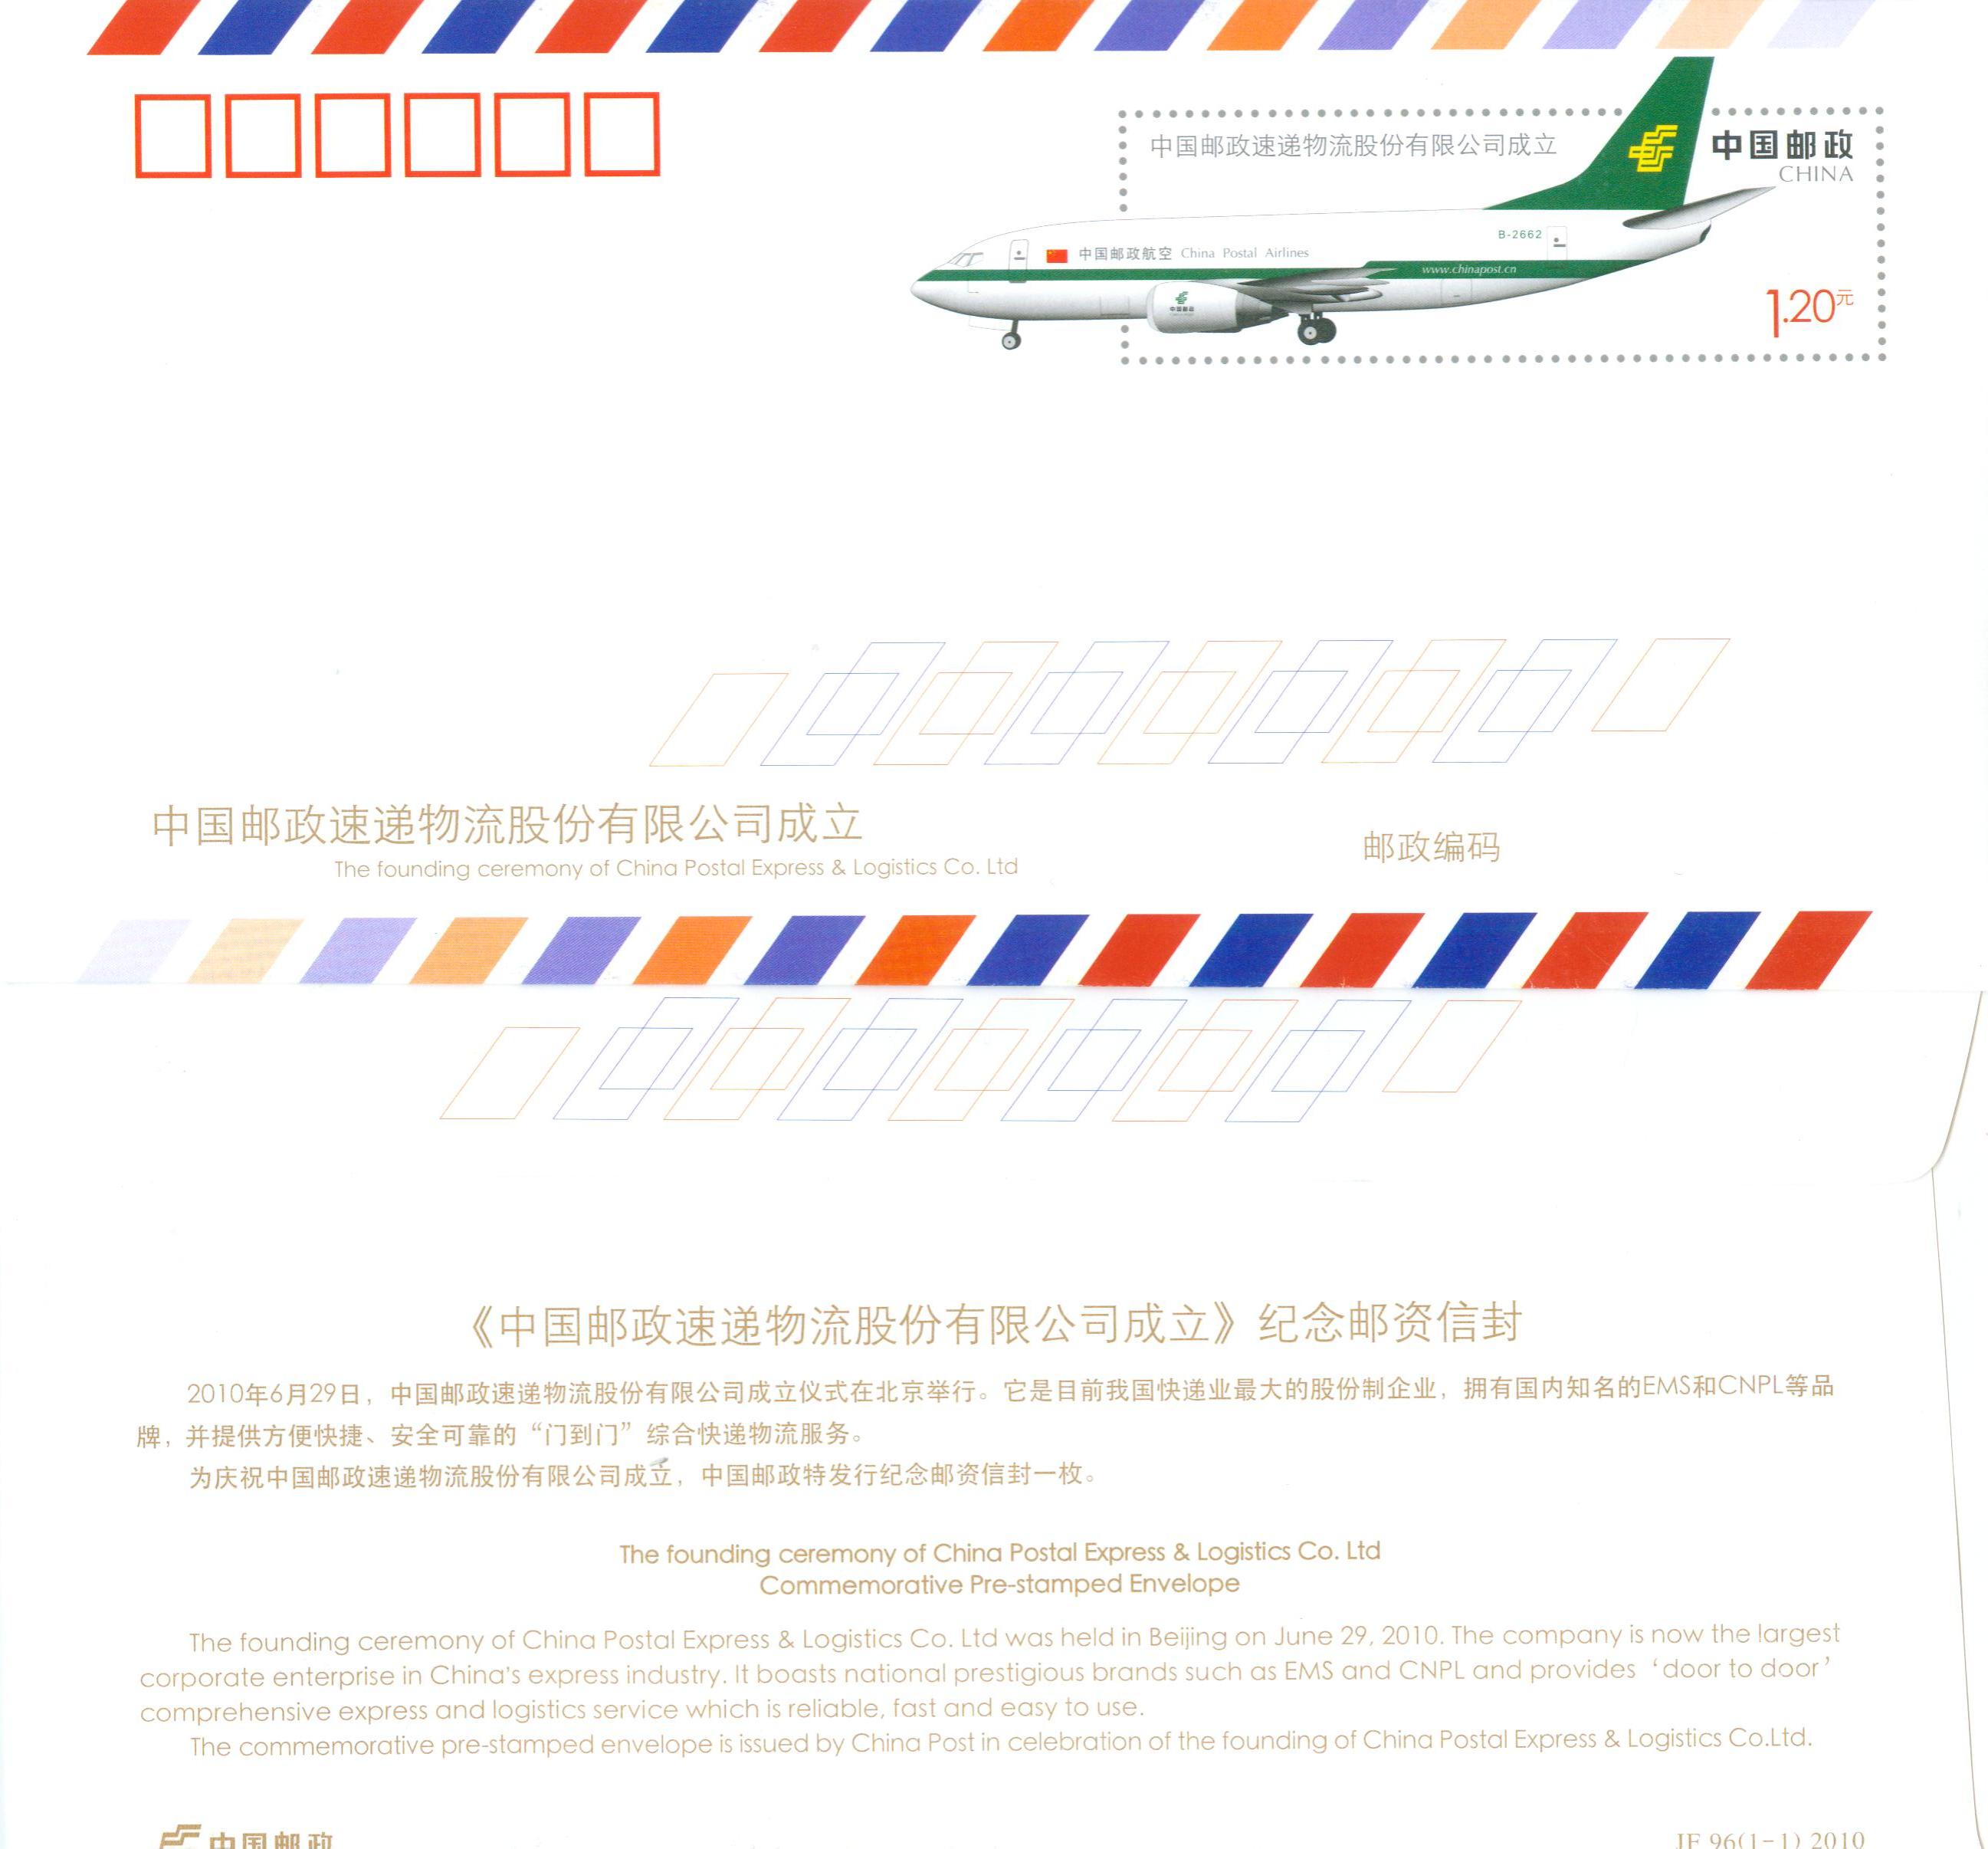 JF96 The Founding Ceremony of China Postal Express and Logistic, 2010